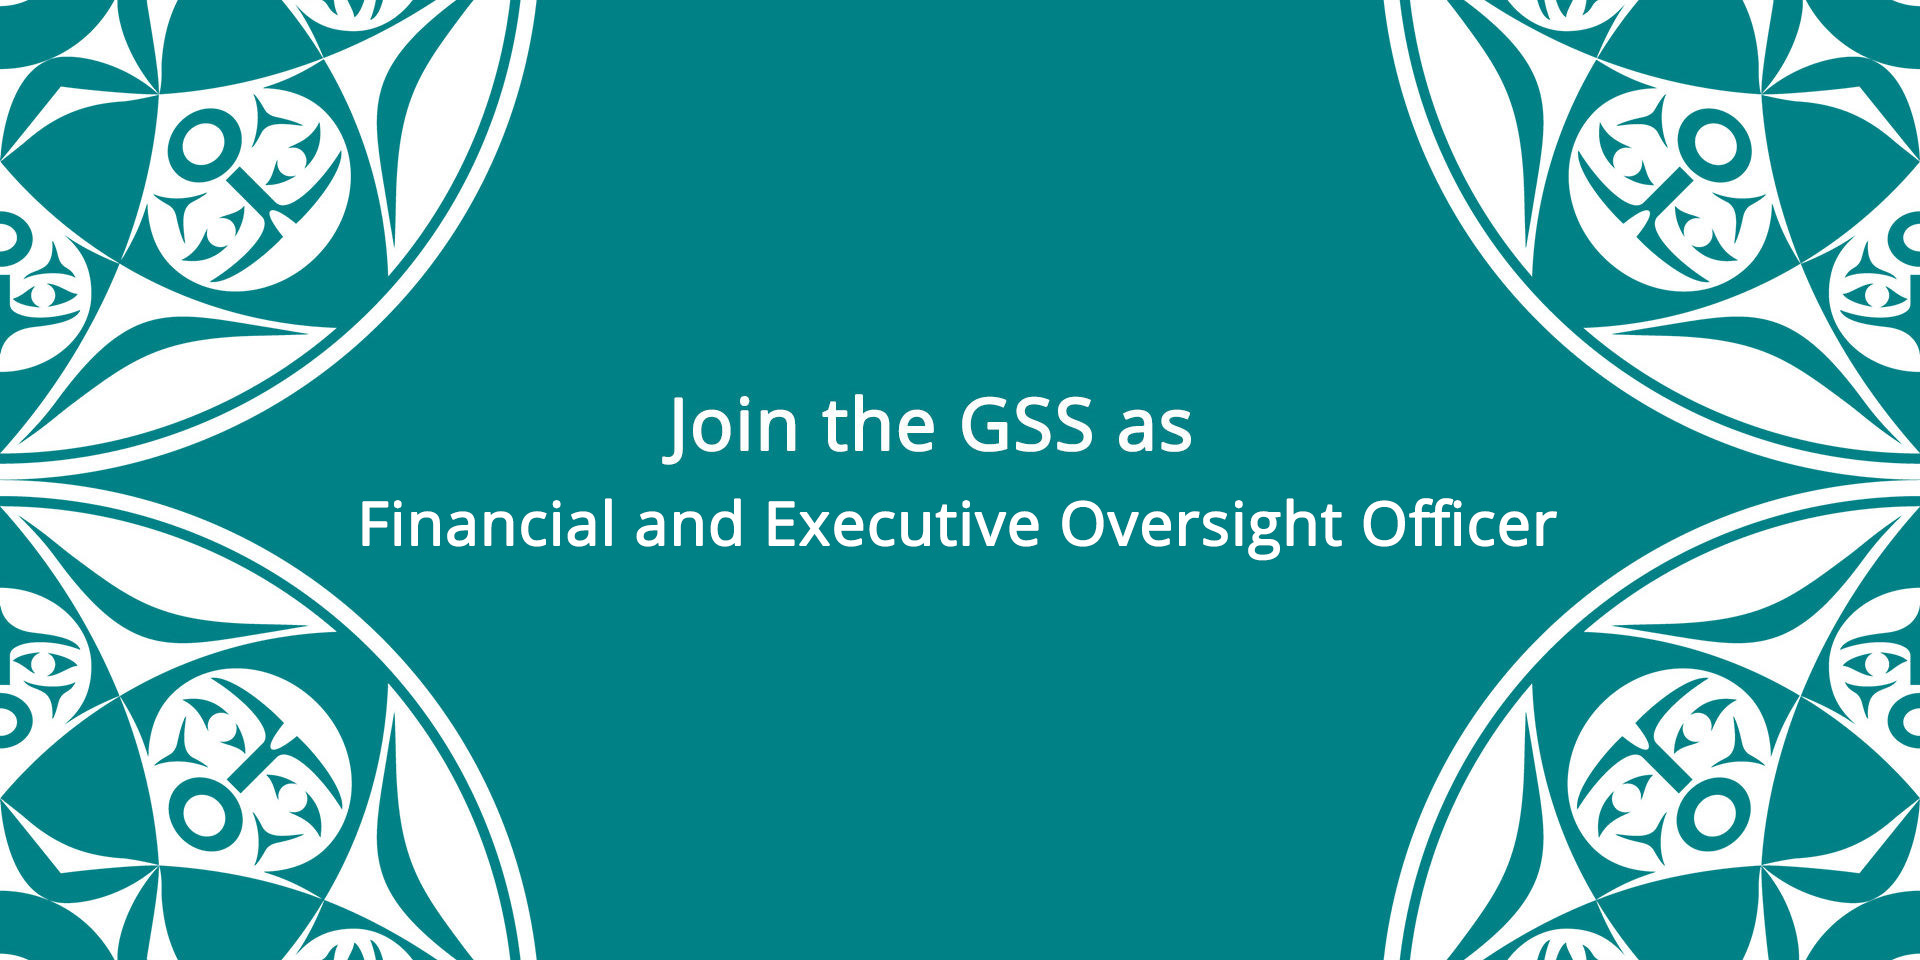 GSS Financial and Executive Oversight Officer